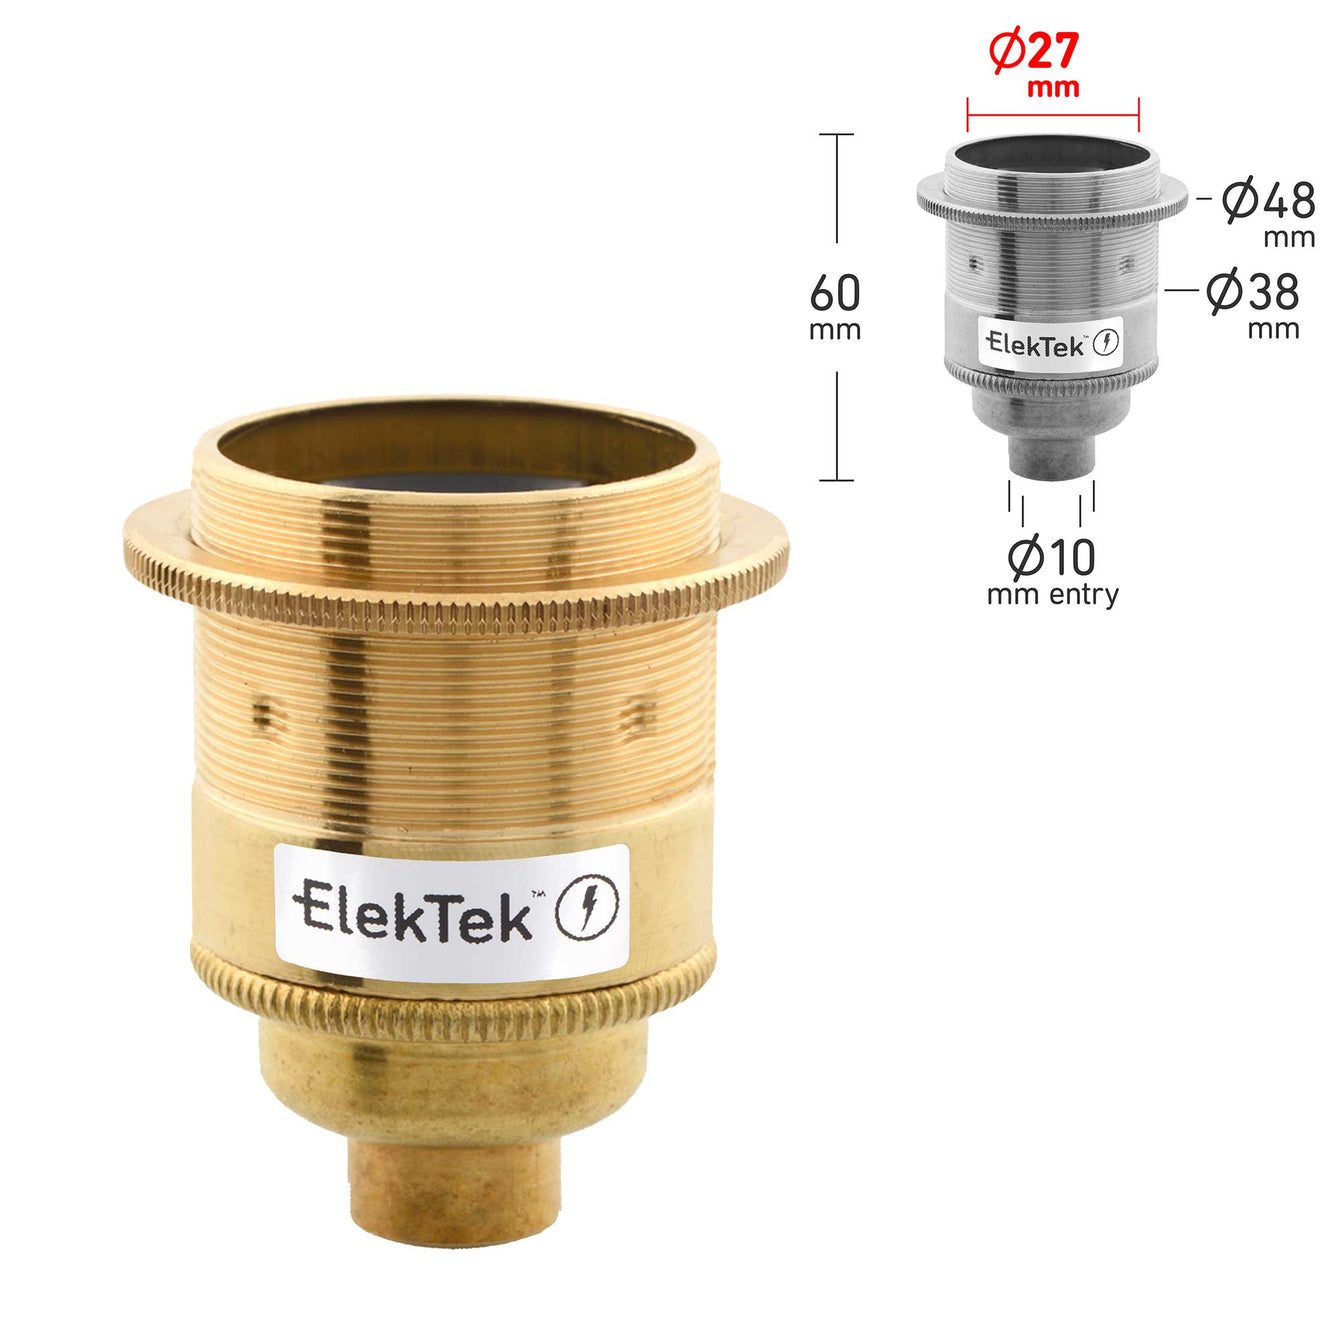 ElekTek ES Edison Screw E27 Lamp Holder With Shade Ring 10mm or Half Inch Entry Ideal for Vintage Filament Bulbs Brass - Buy It Better Antique Brass / 10mm